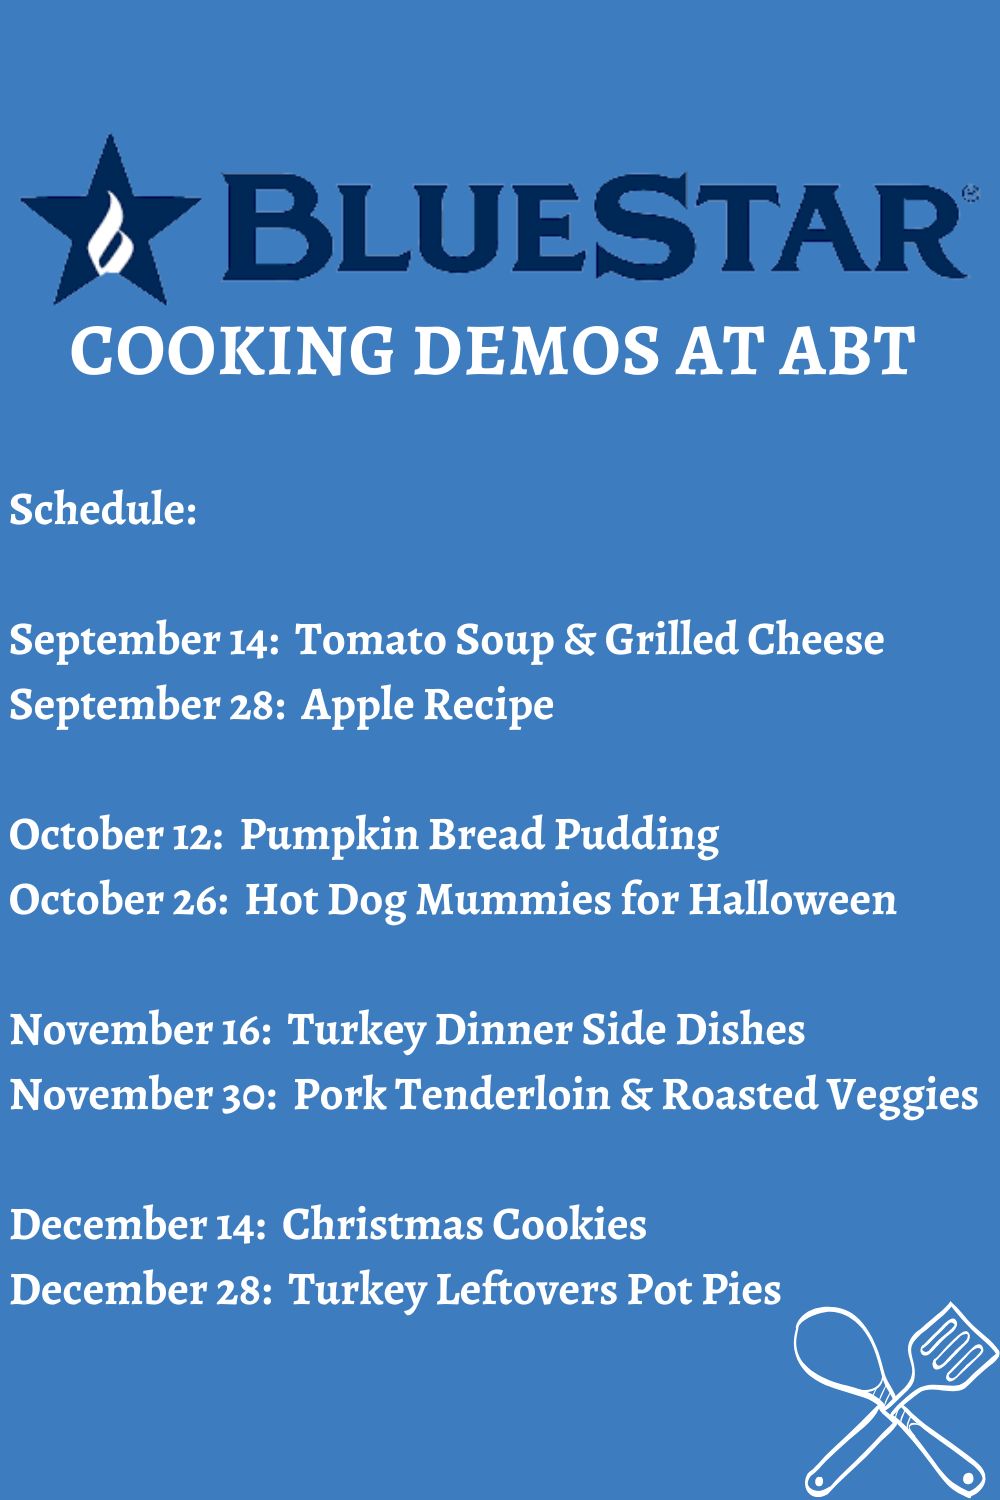 BlueStar logo on a blue background. White text below reads "cooking demos at Abt."